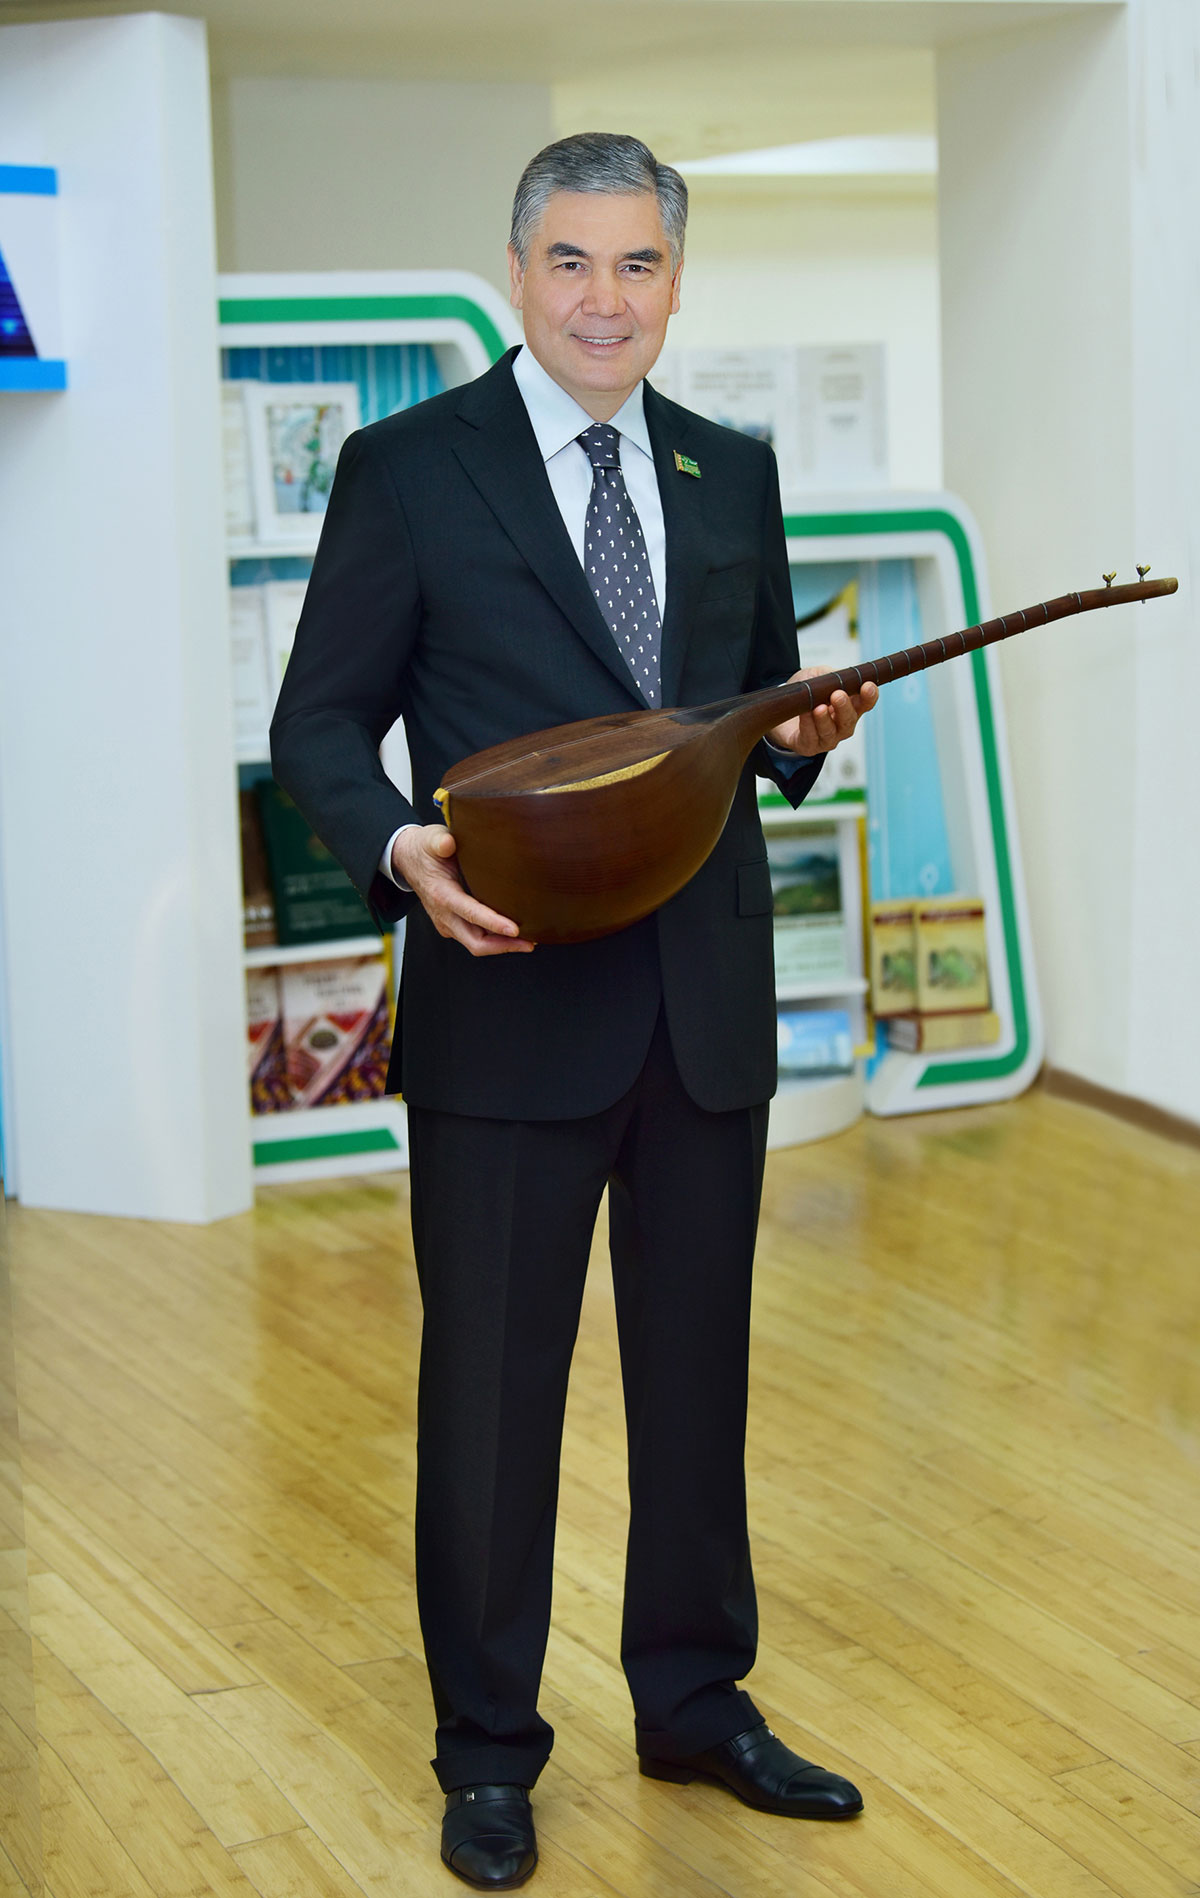 Ashgabat hosted the 23rd Conference of the World Turkmens’ Humanitarian Association